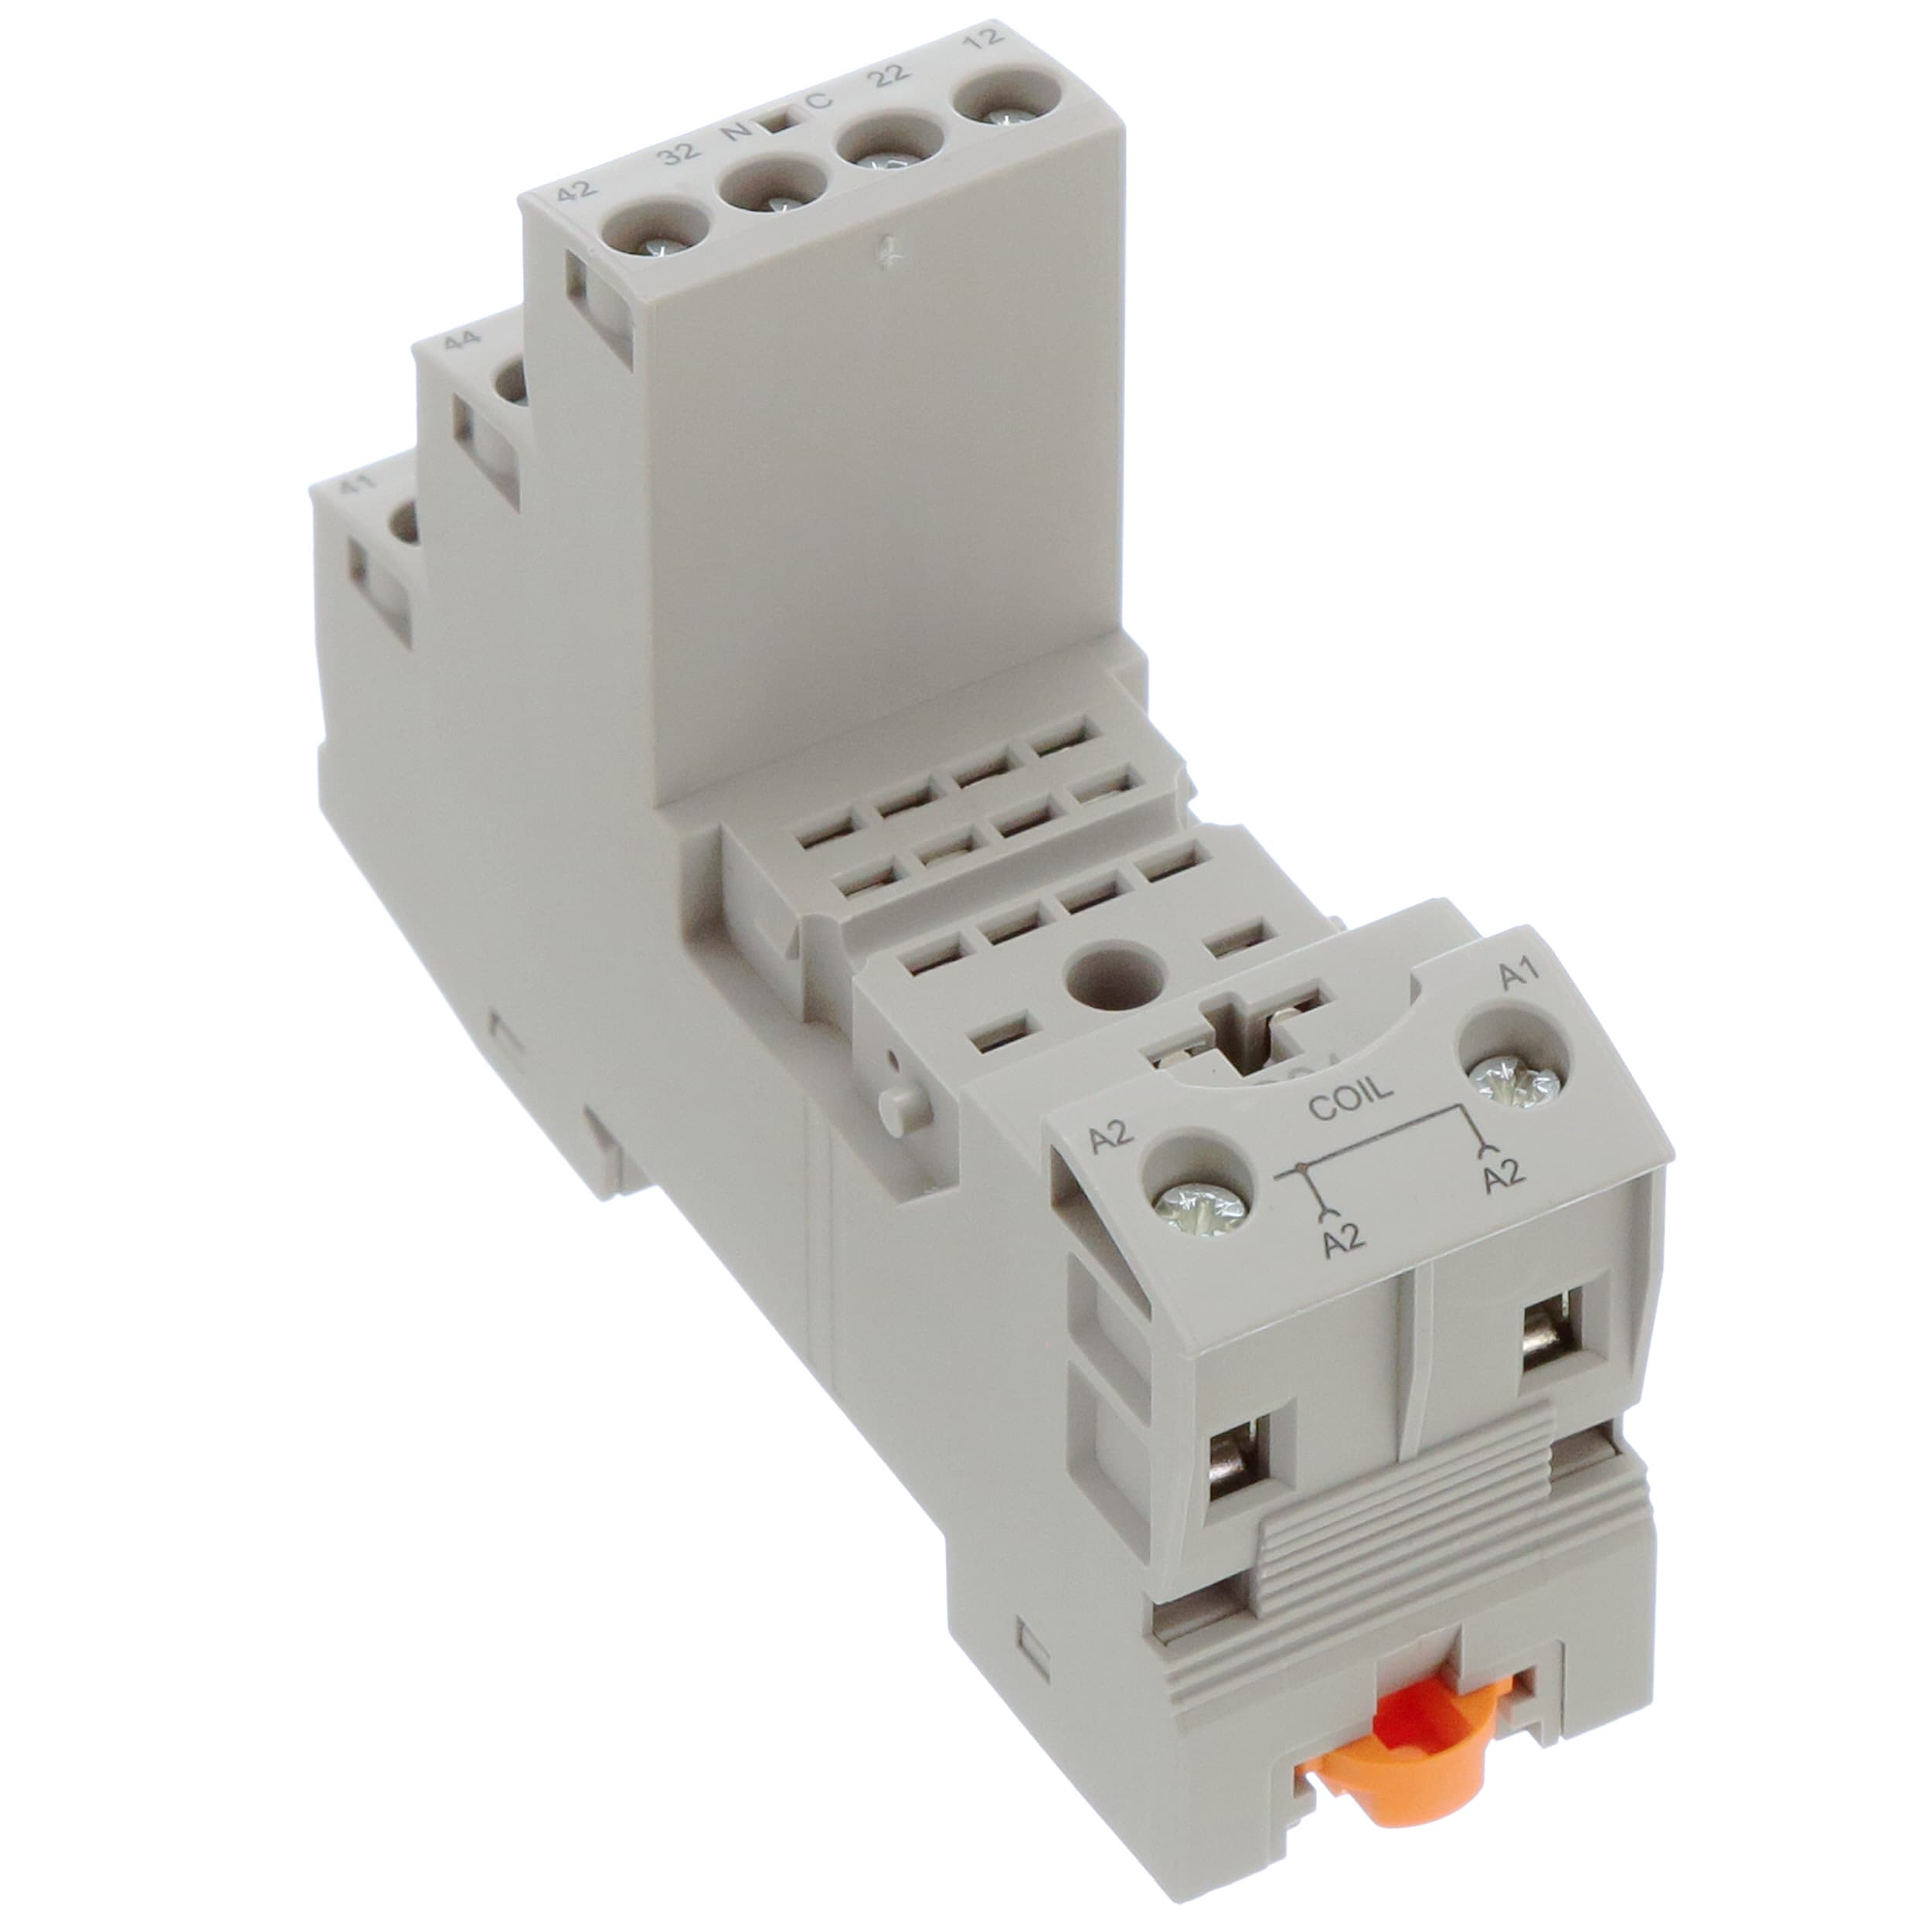 Phoenix Contact - 2900932 - Relay base, screw terminals, for DPDT 